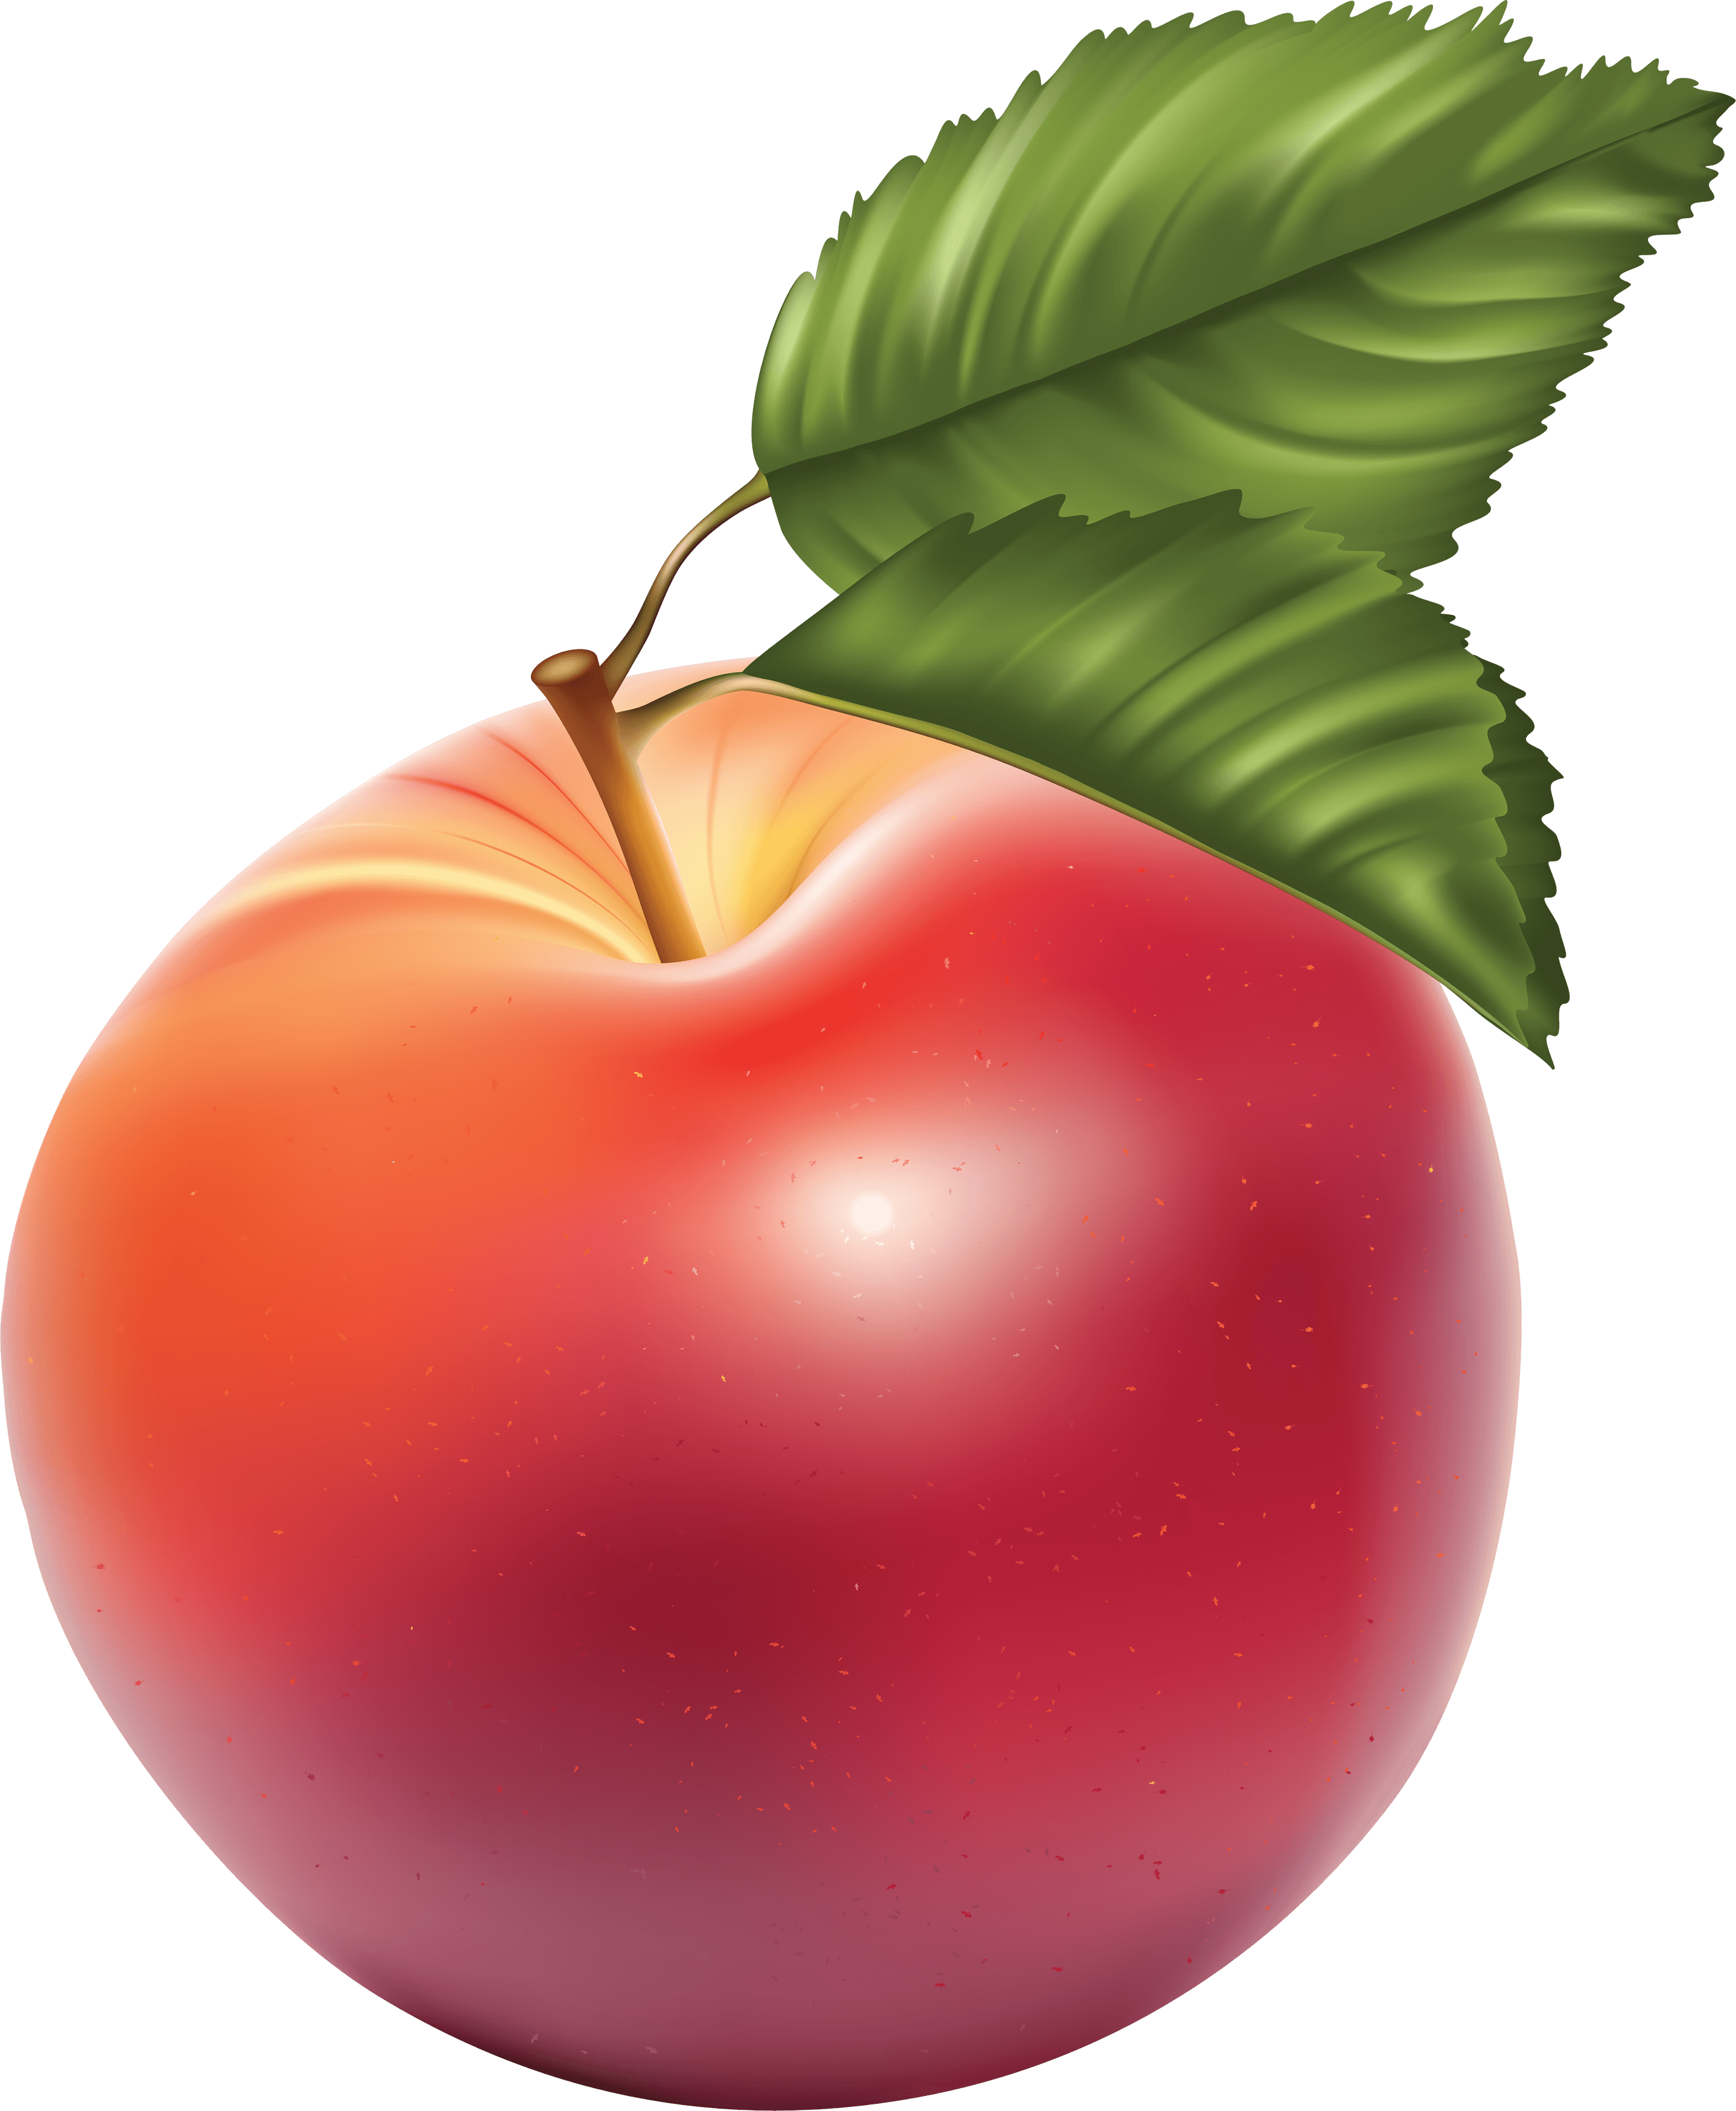 Apple Hd Transparent, Apple, Red Apple Clipart, Fruit, Green Apple PNG  Image For Free Download